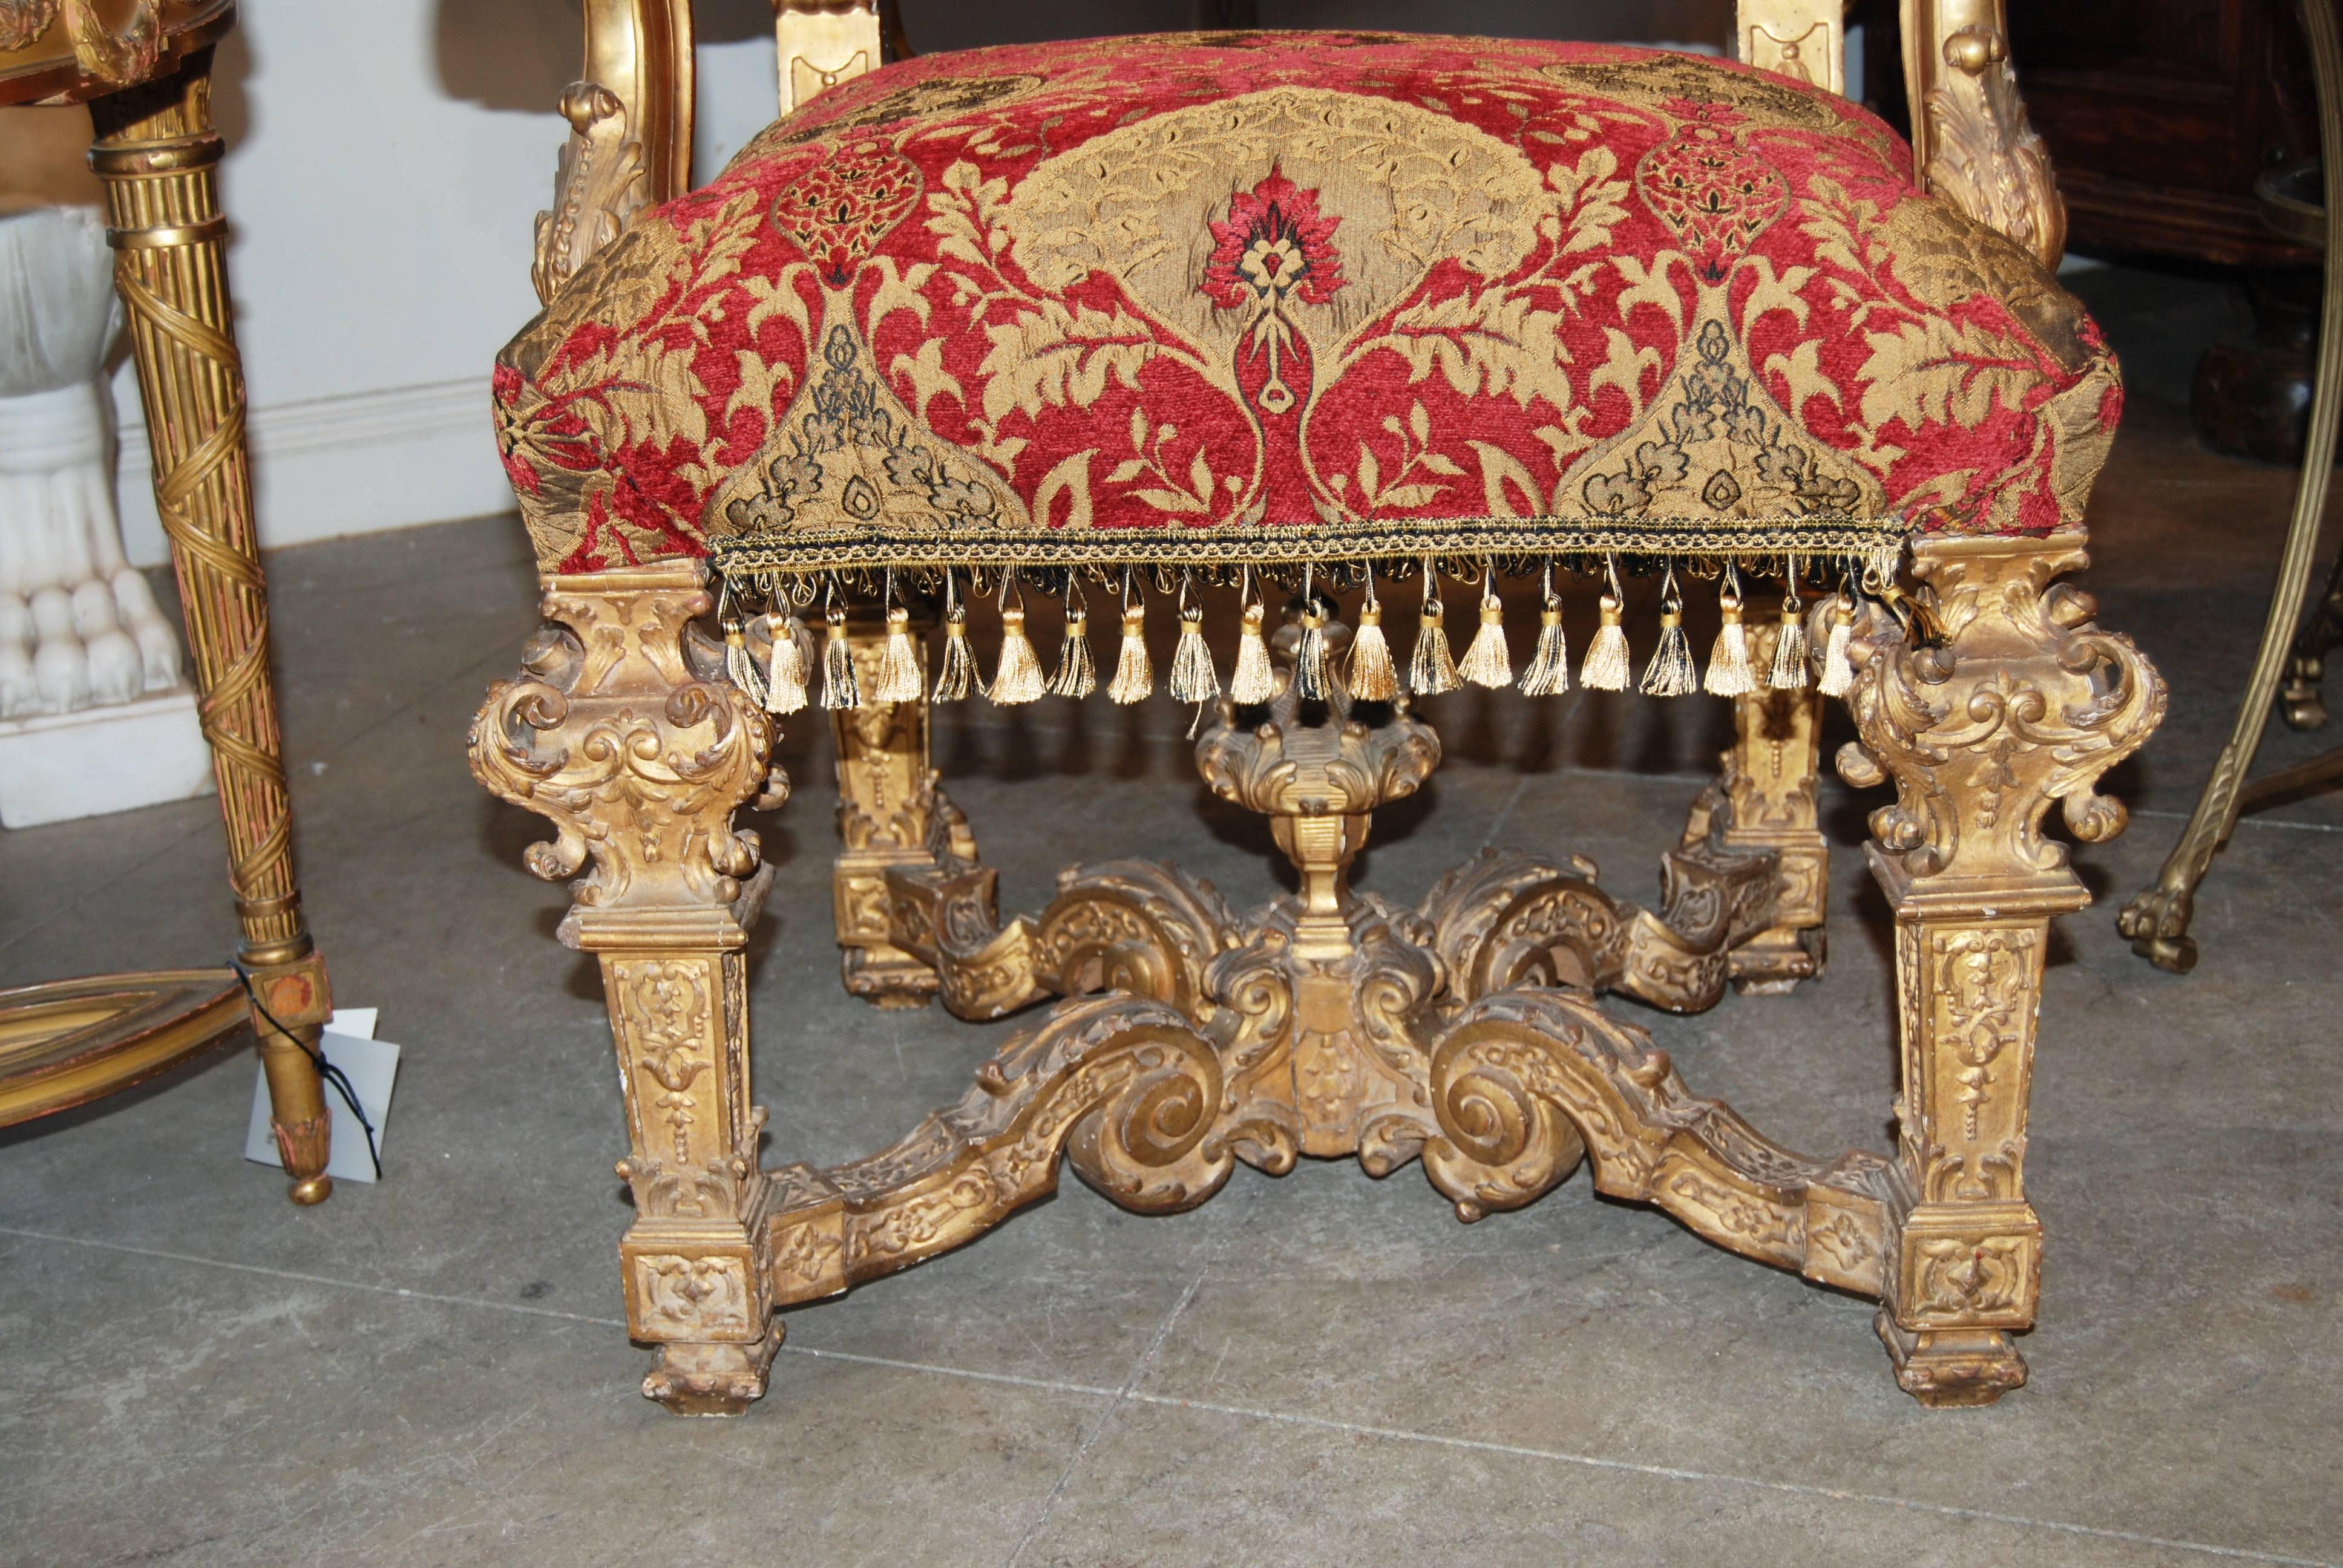 Beautifully carved and gilded armchairs.